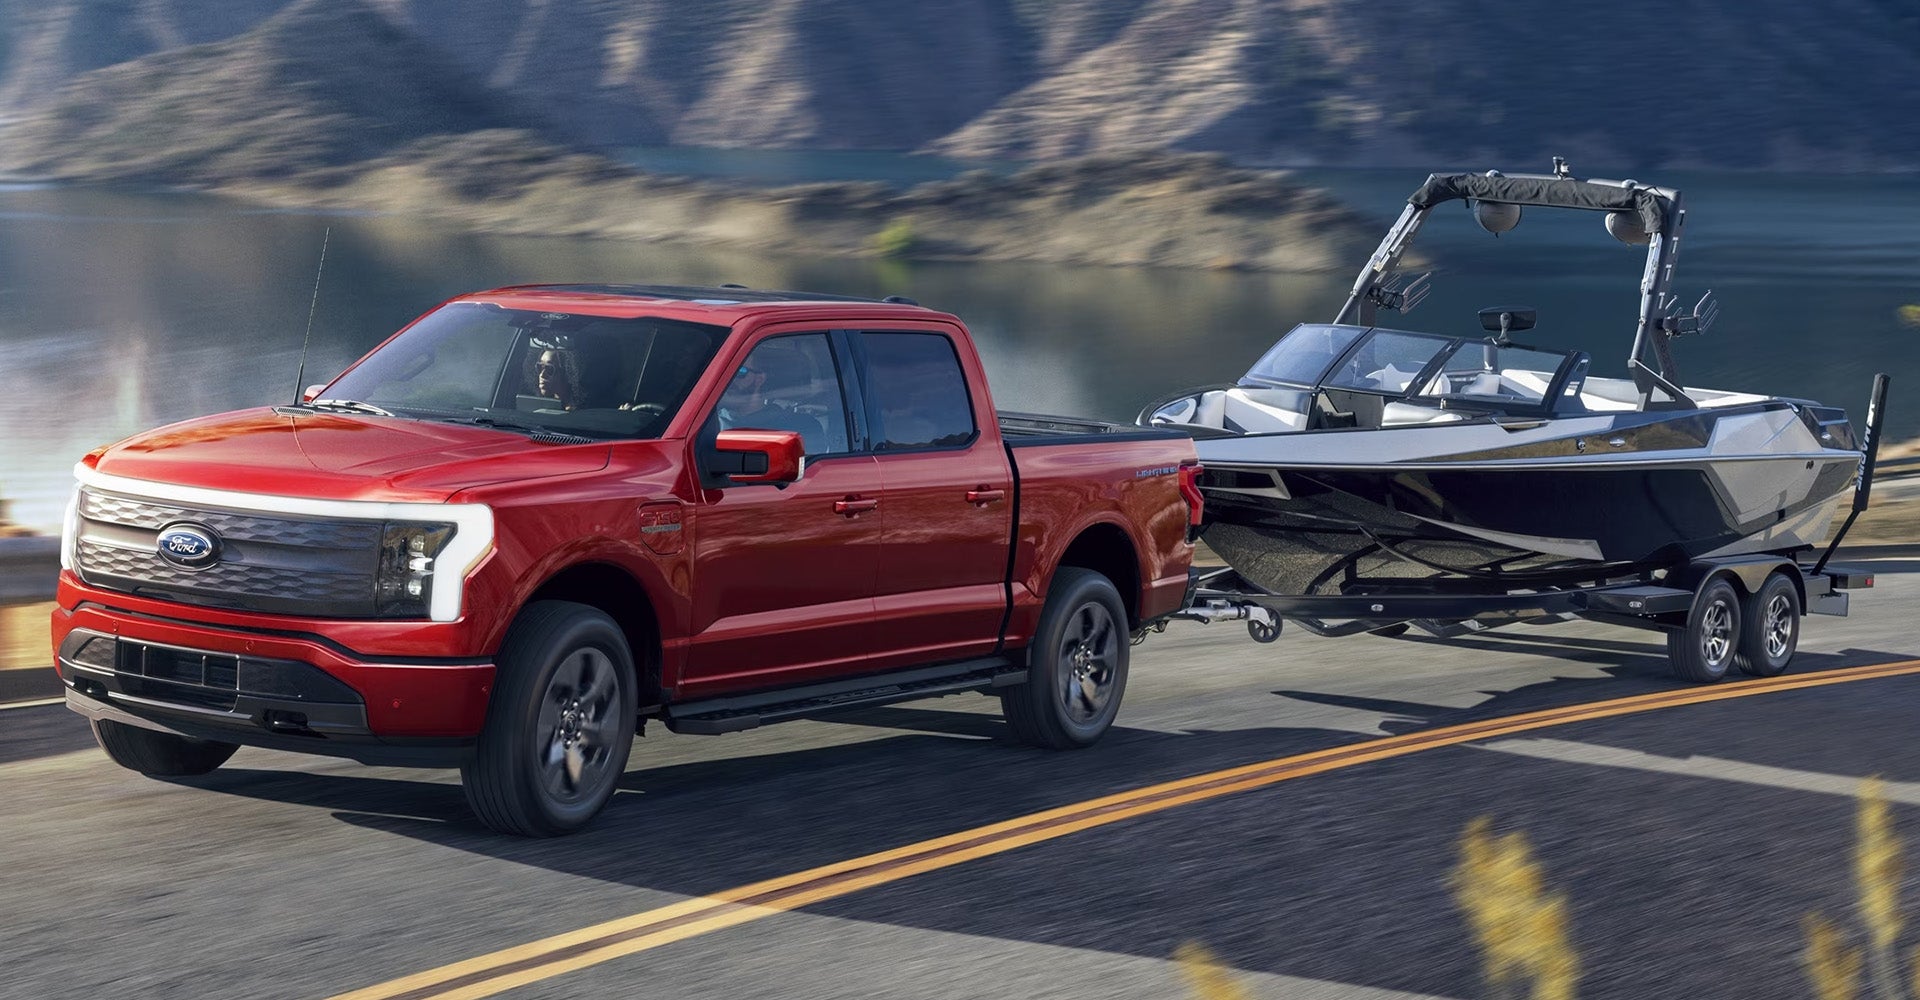 Ford F-150 Lightning Towing Capacity